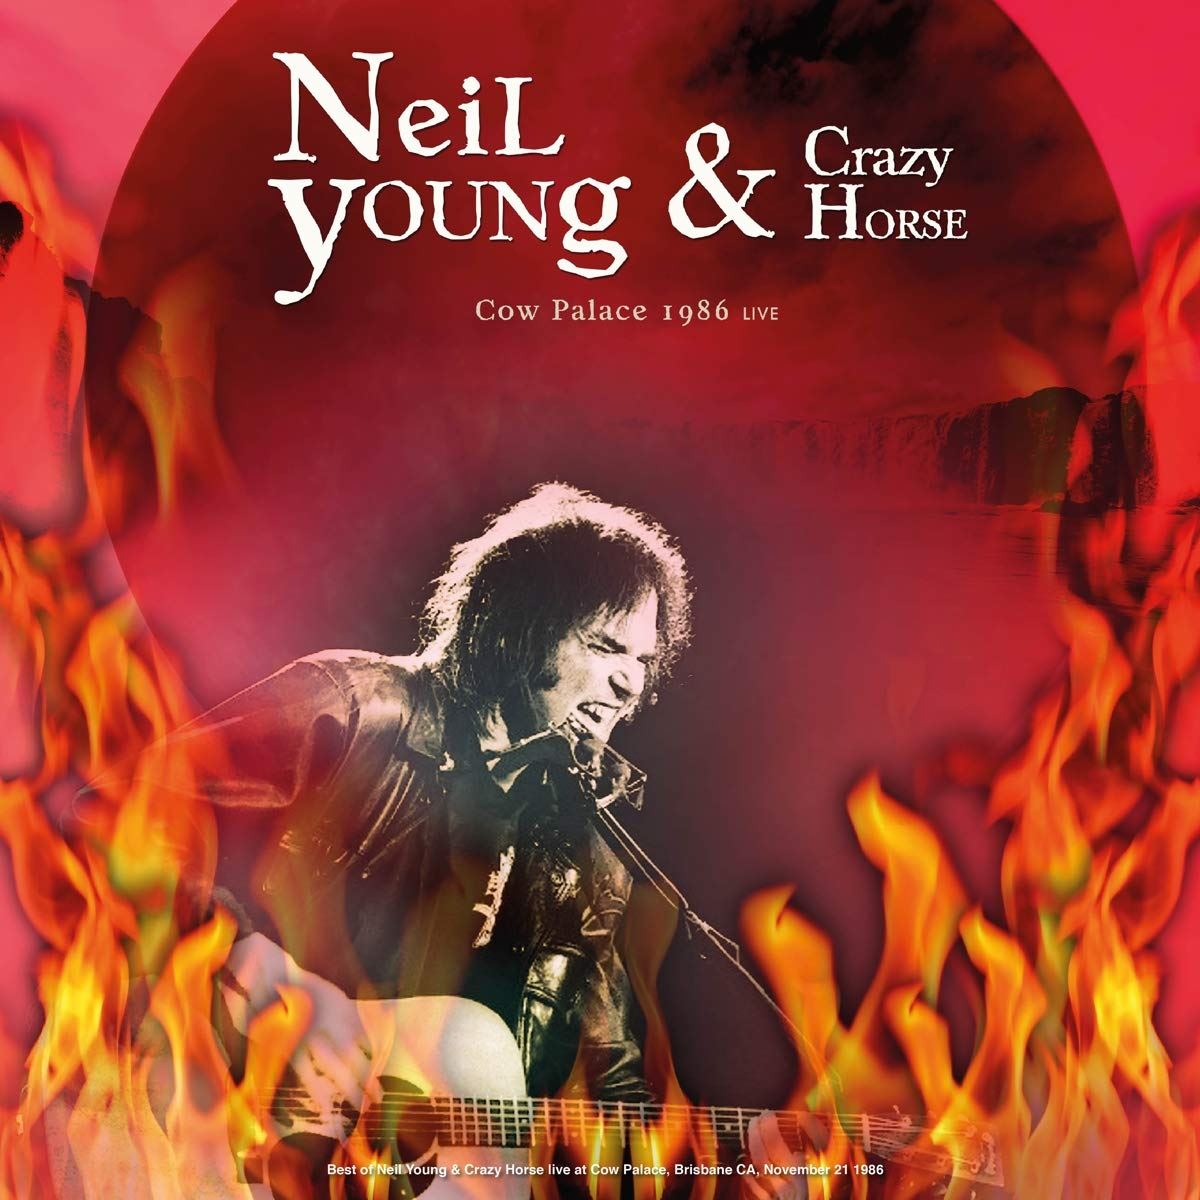 Neil Young & Crazy Horse - Best Of Cow Palace 1986 Live - Vinyl